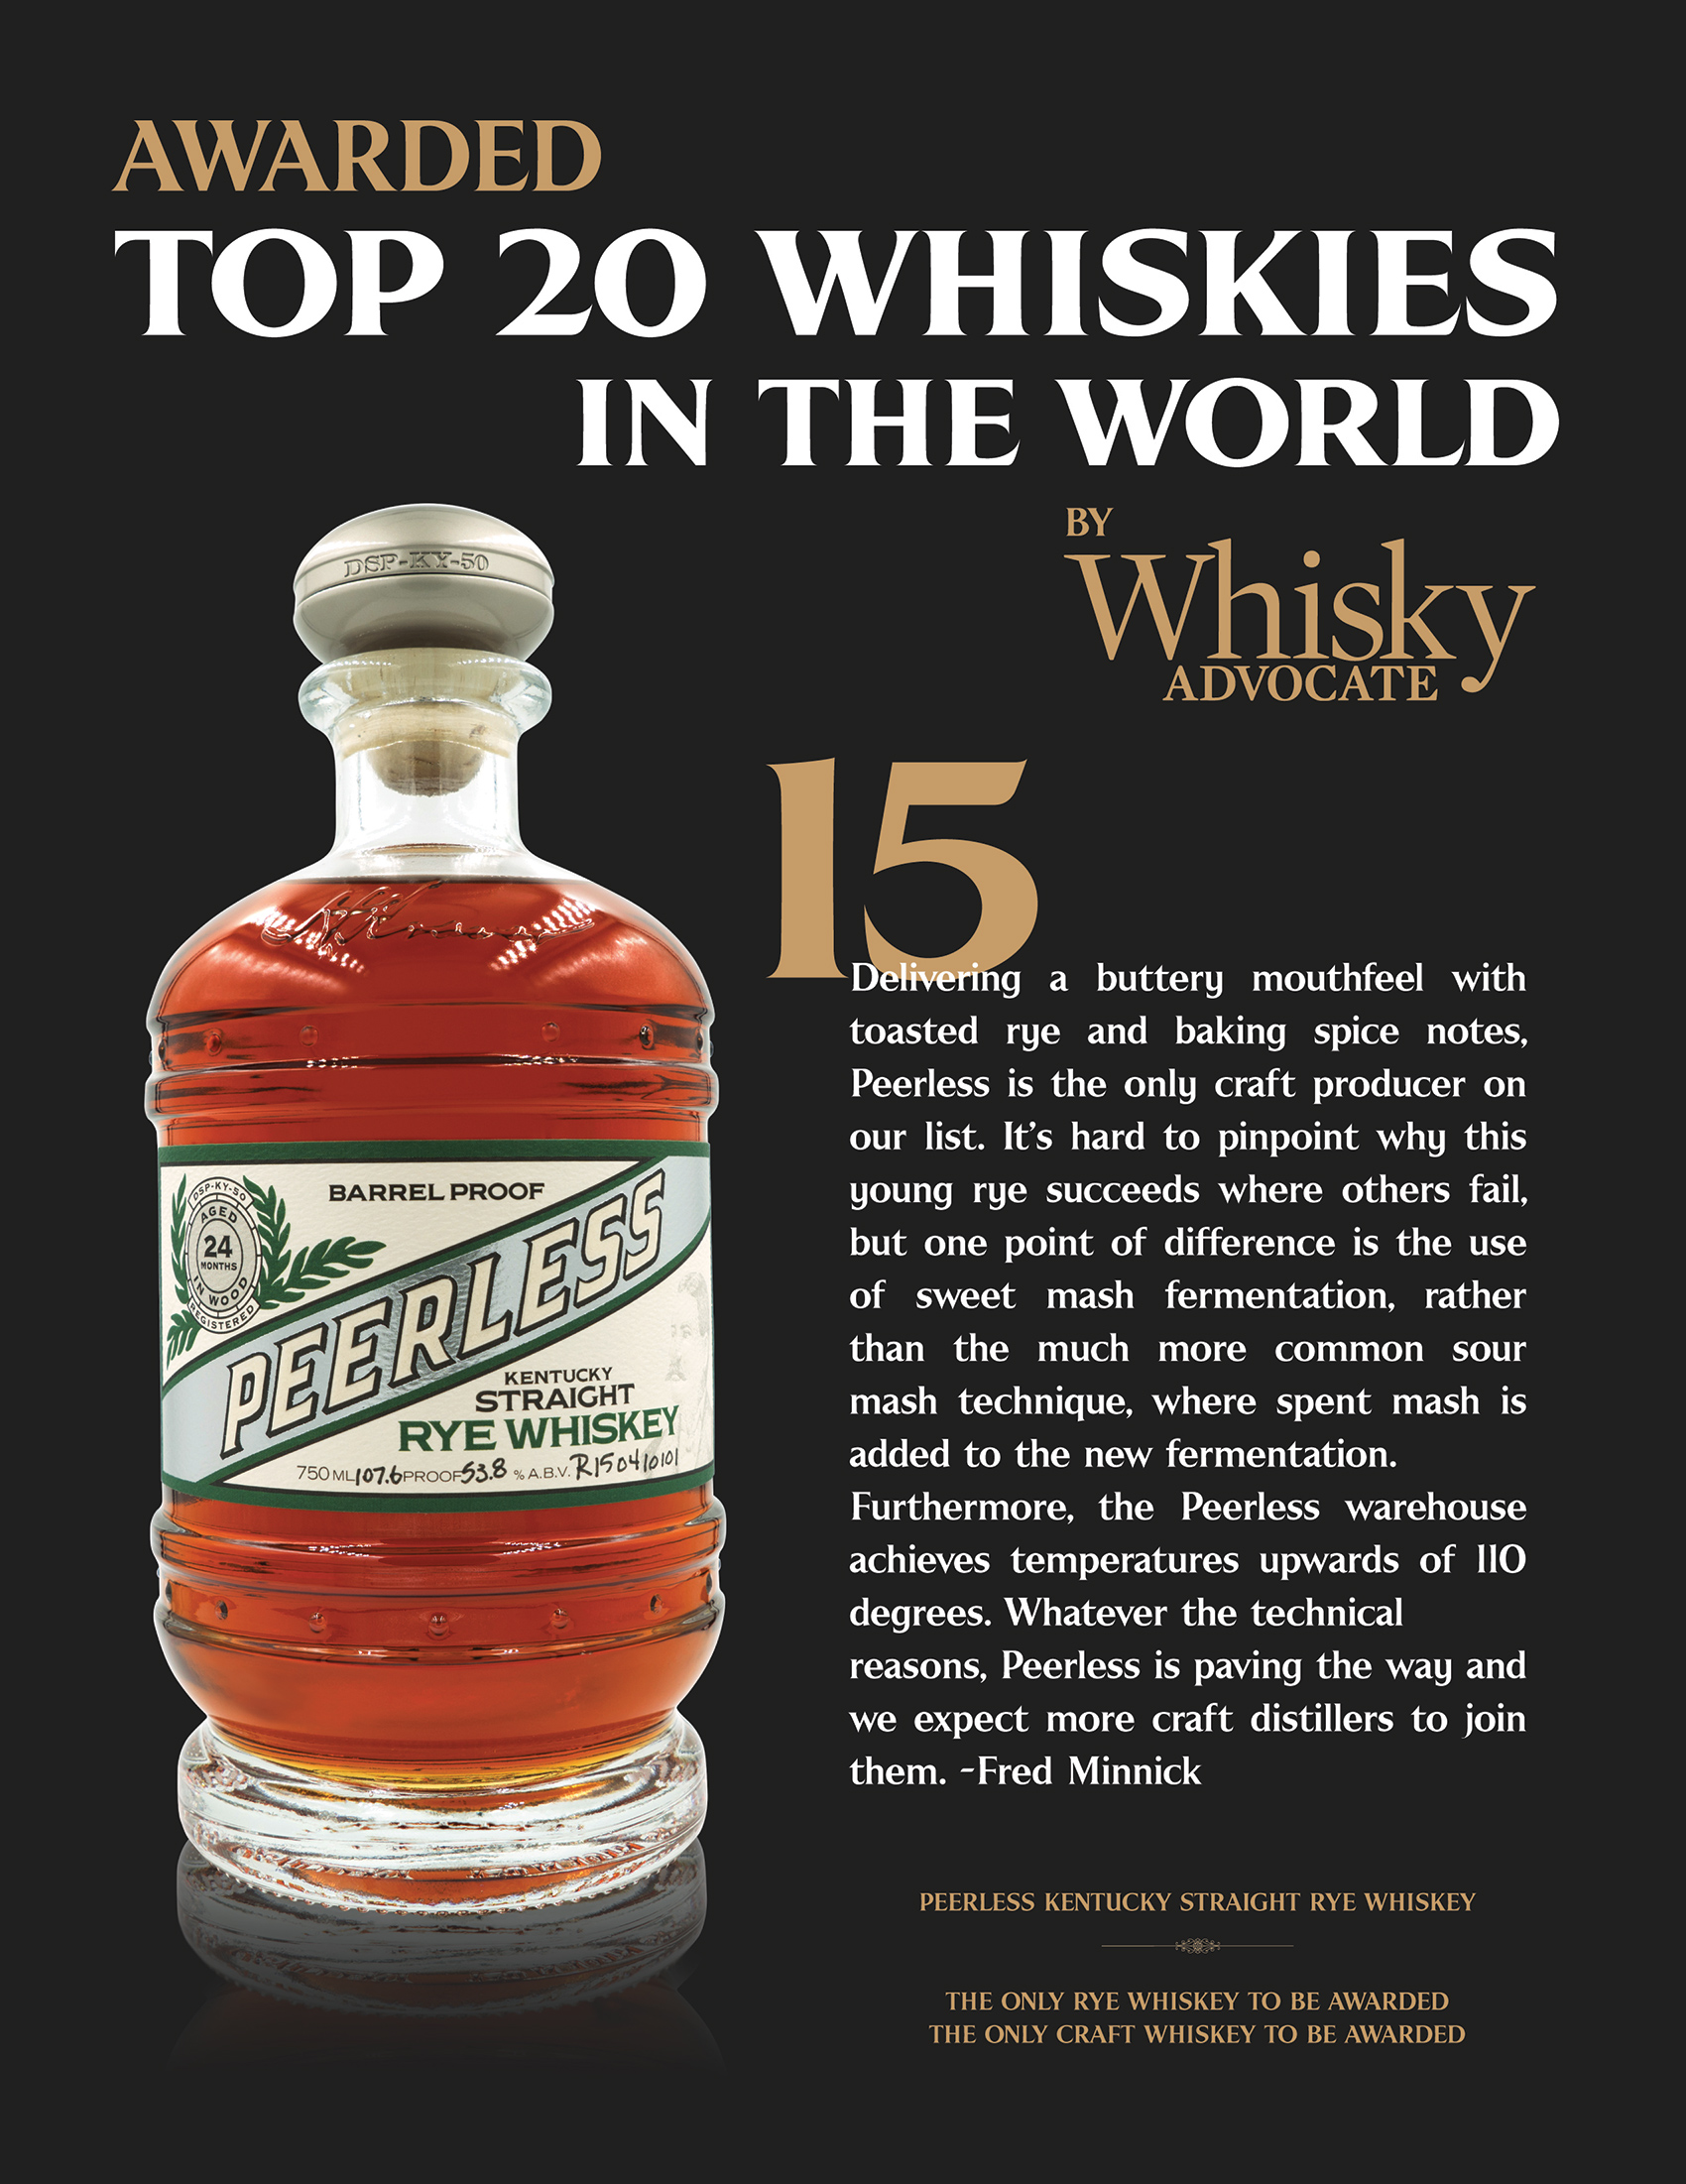 Top 20 whiskies across the world